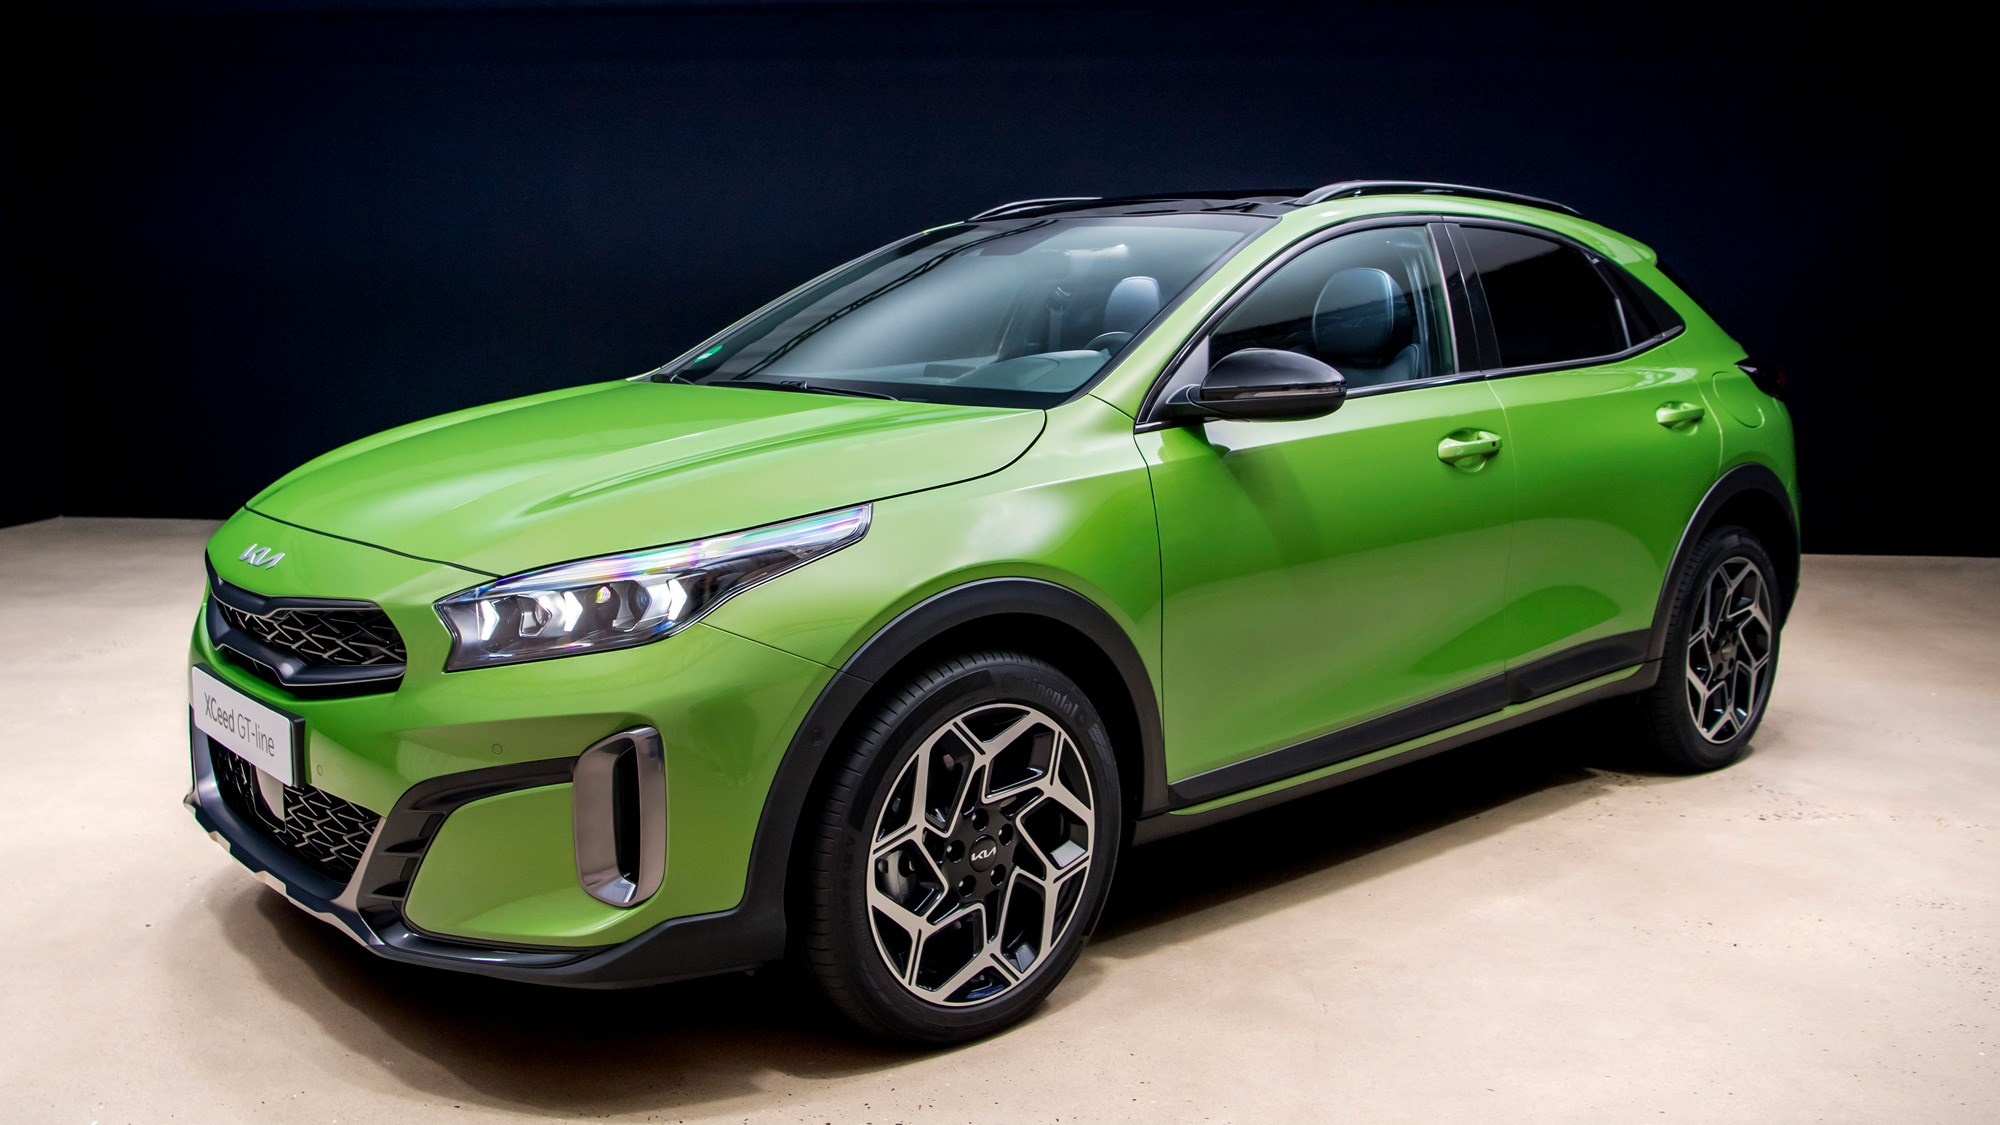 New 2022 Kia XCeed facelift on sale in the UK now priced from £22,995